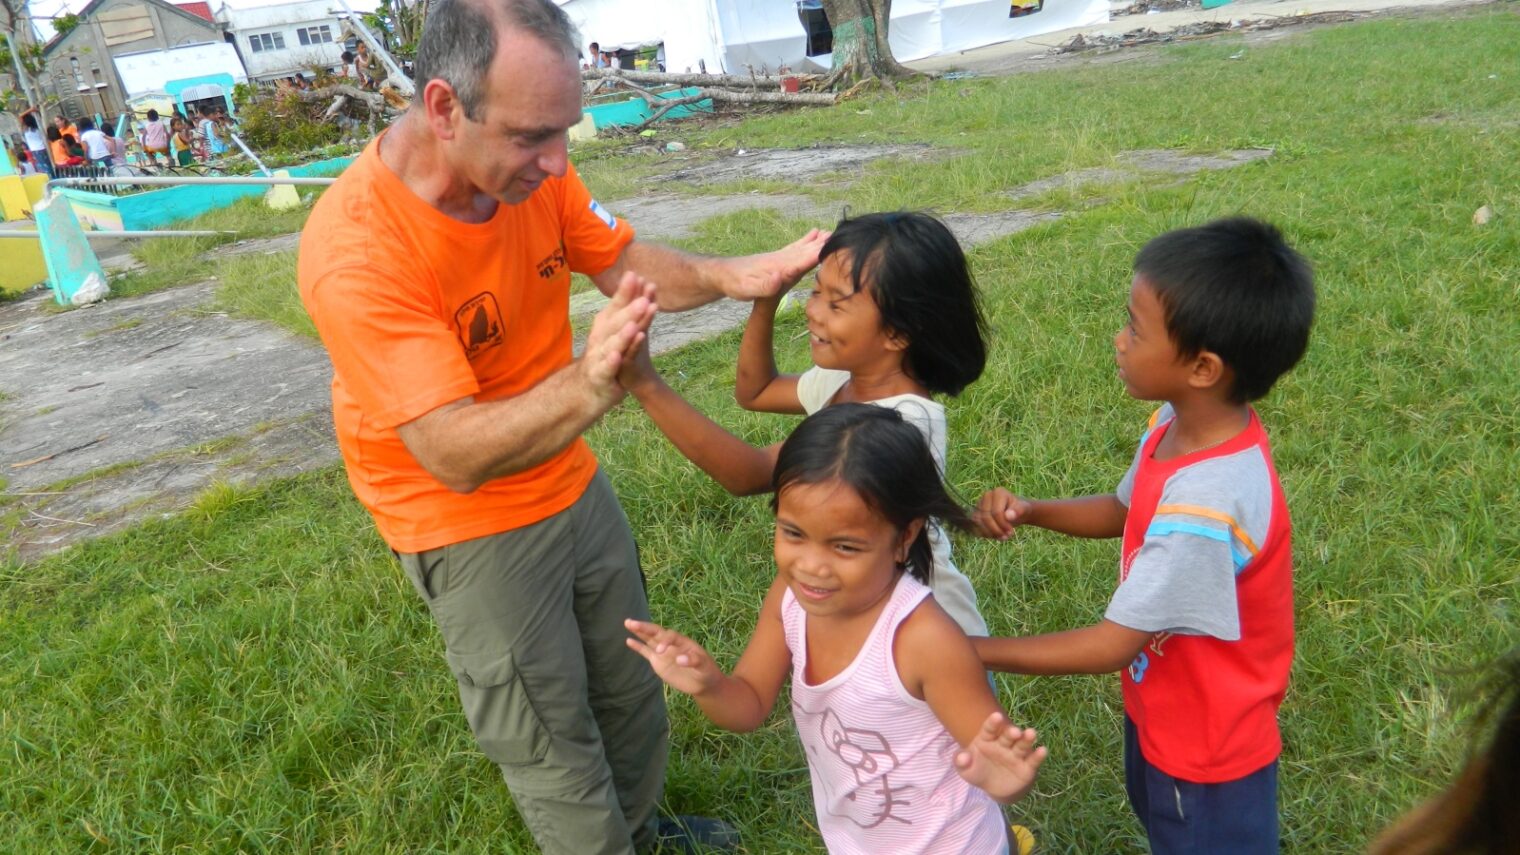 Israeli trauma expert Moshe Farchi working with children affected by the 2013 typhoon in the Philippines. Photo: courtesy